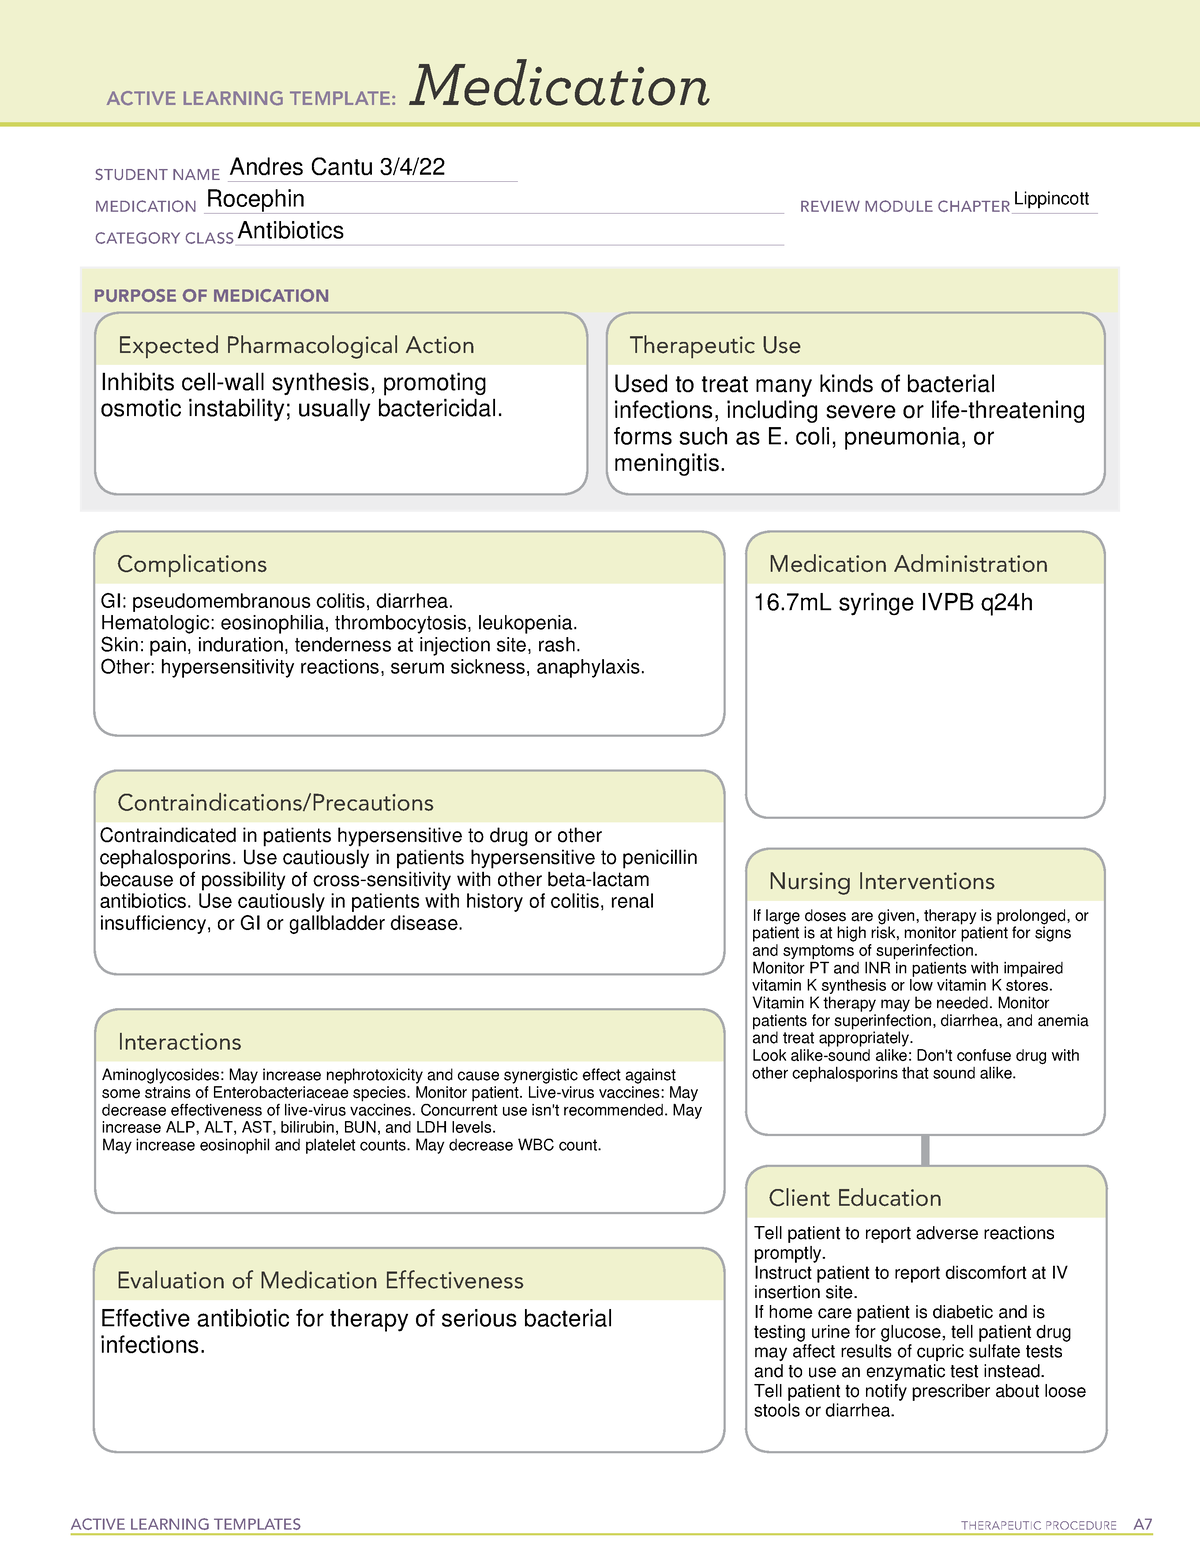 ATI Med Form, Rocephin informational use ACTIVE LEARNING TEMPLATE